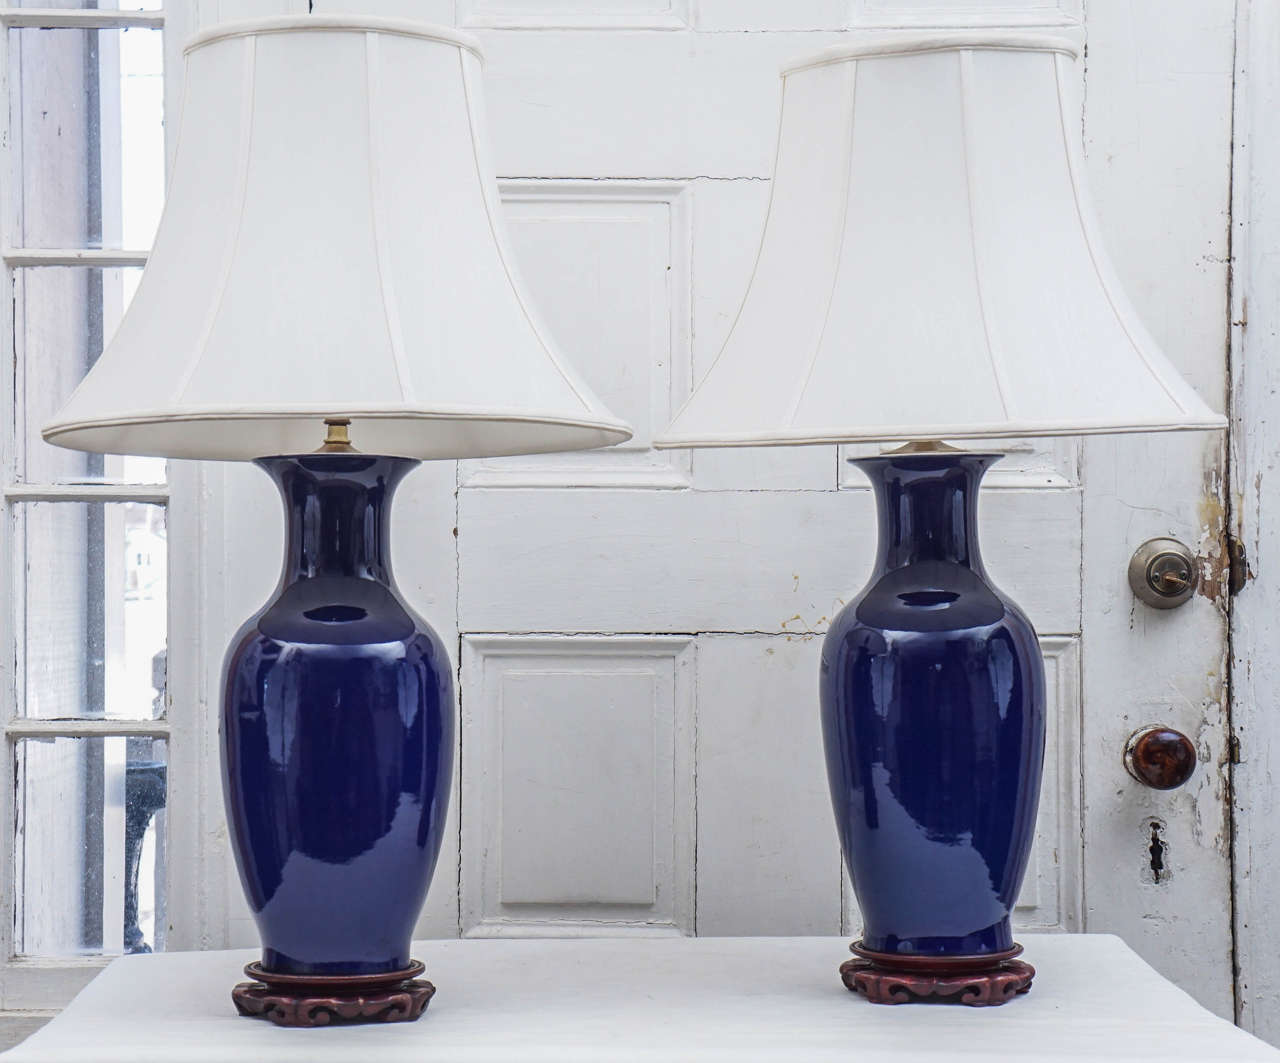 This lovely pair of lamps made from old Chinese porcelain vases in an  over all monochromatic rich deep blue glaze are of good quality and a nice large scale   (mounted as lamps the height  to the top of the shade provided is 28.50 inches). The